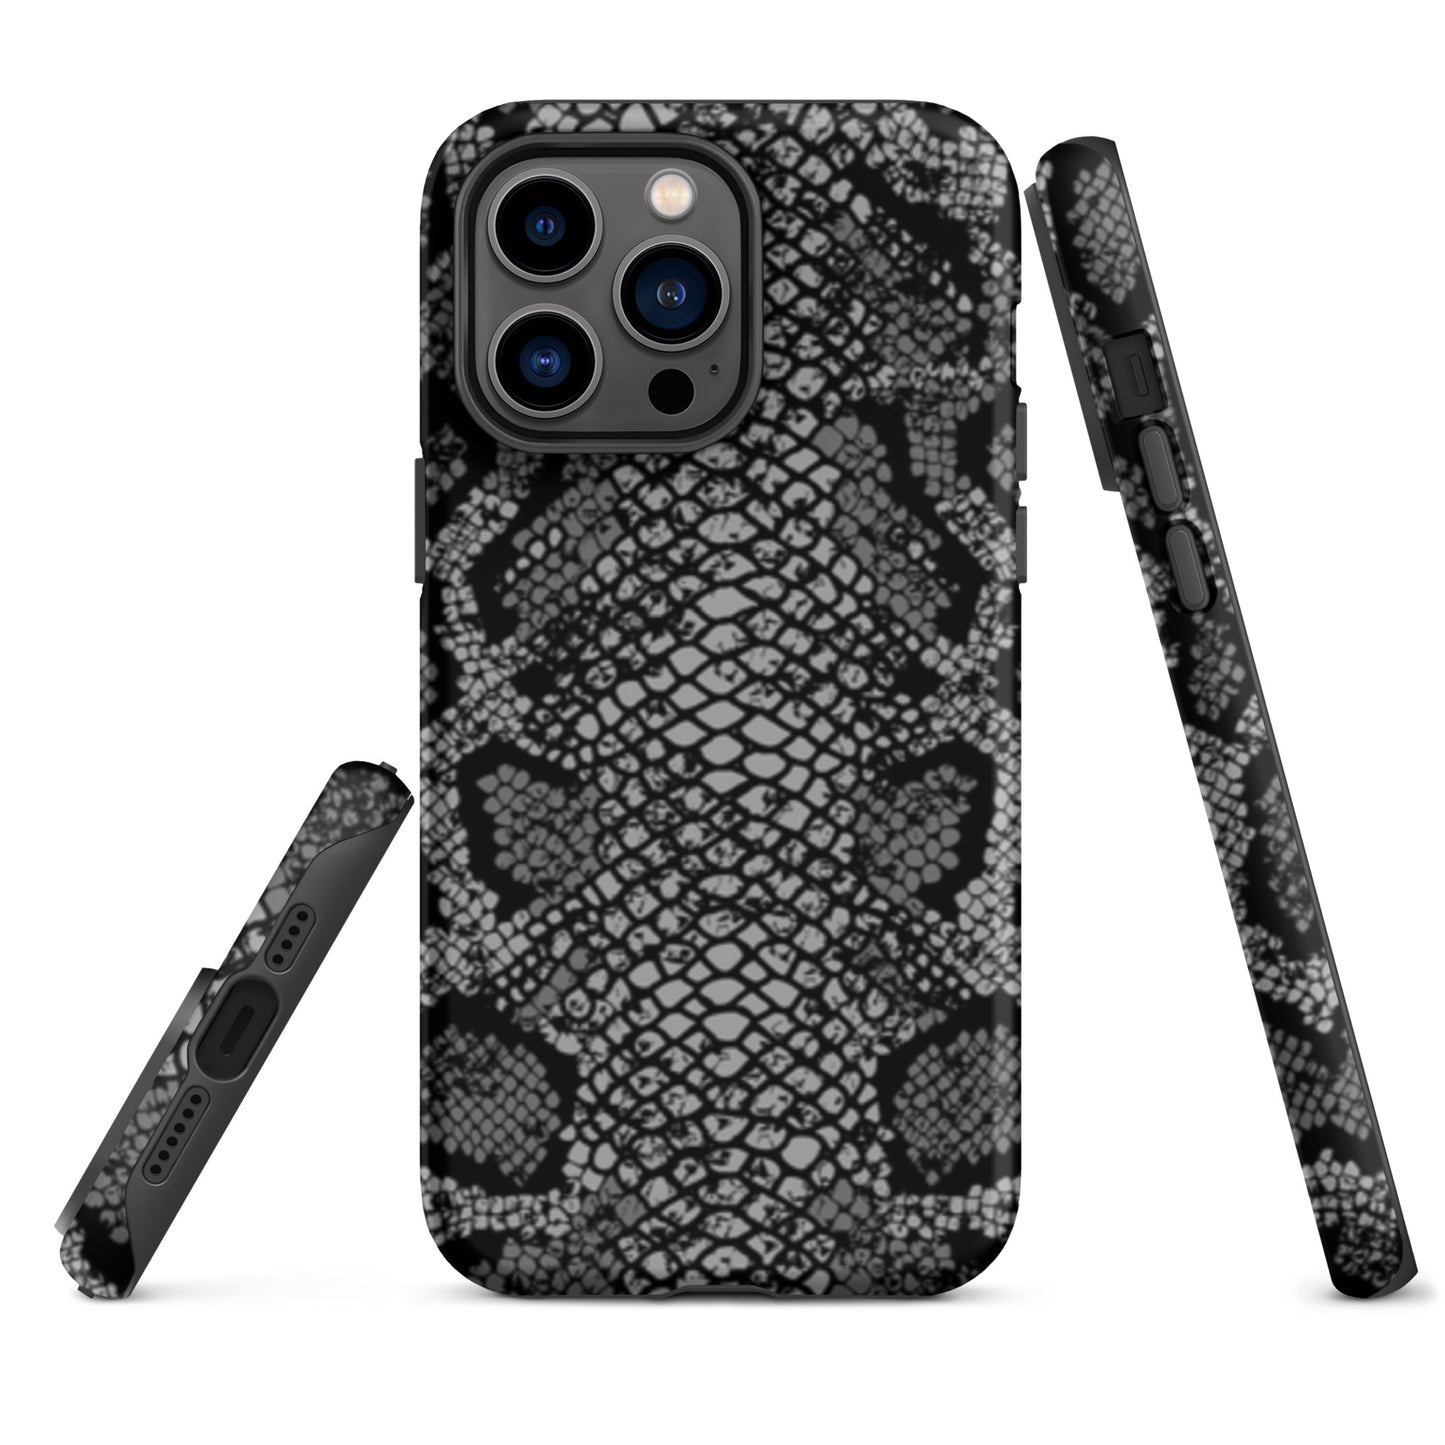 iCase Black Snake HardCase Coque pour iPhone